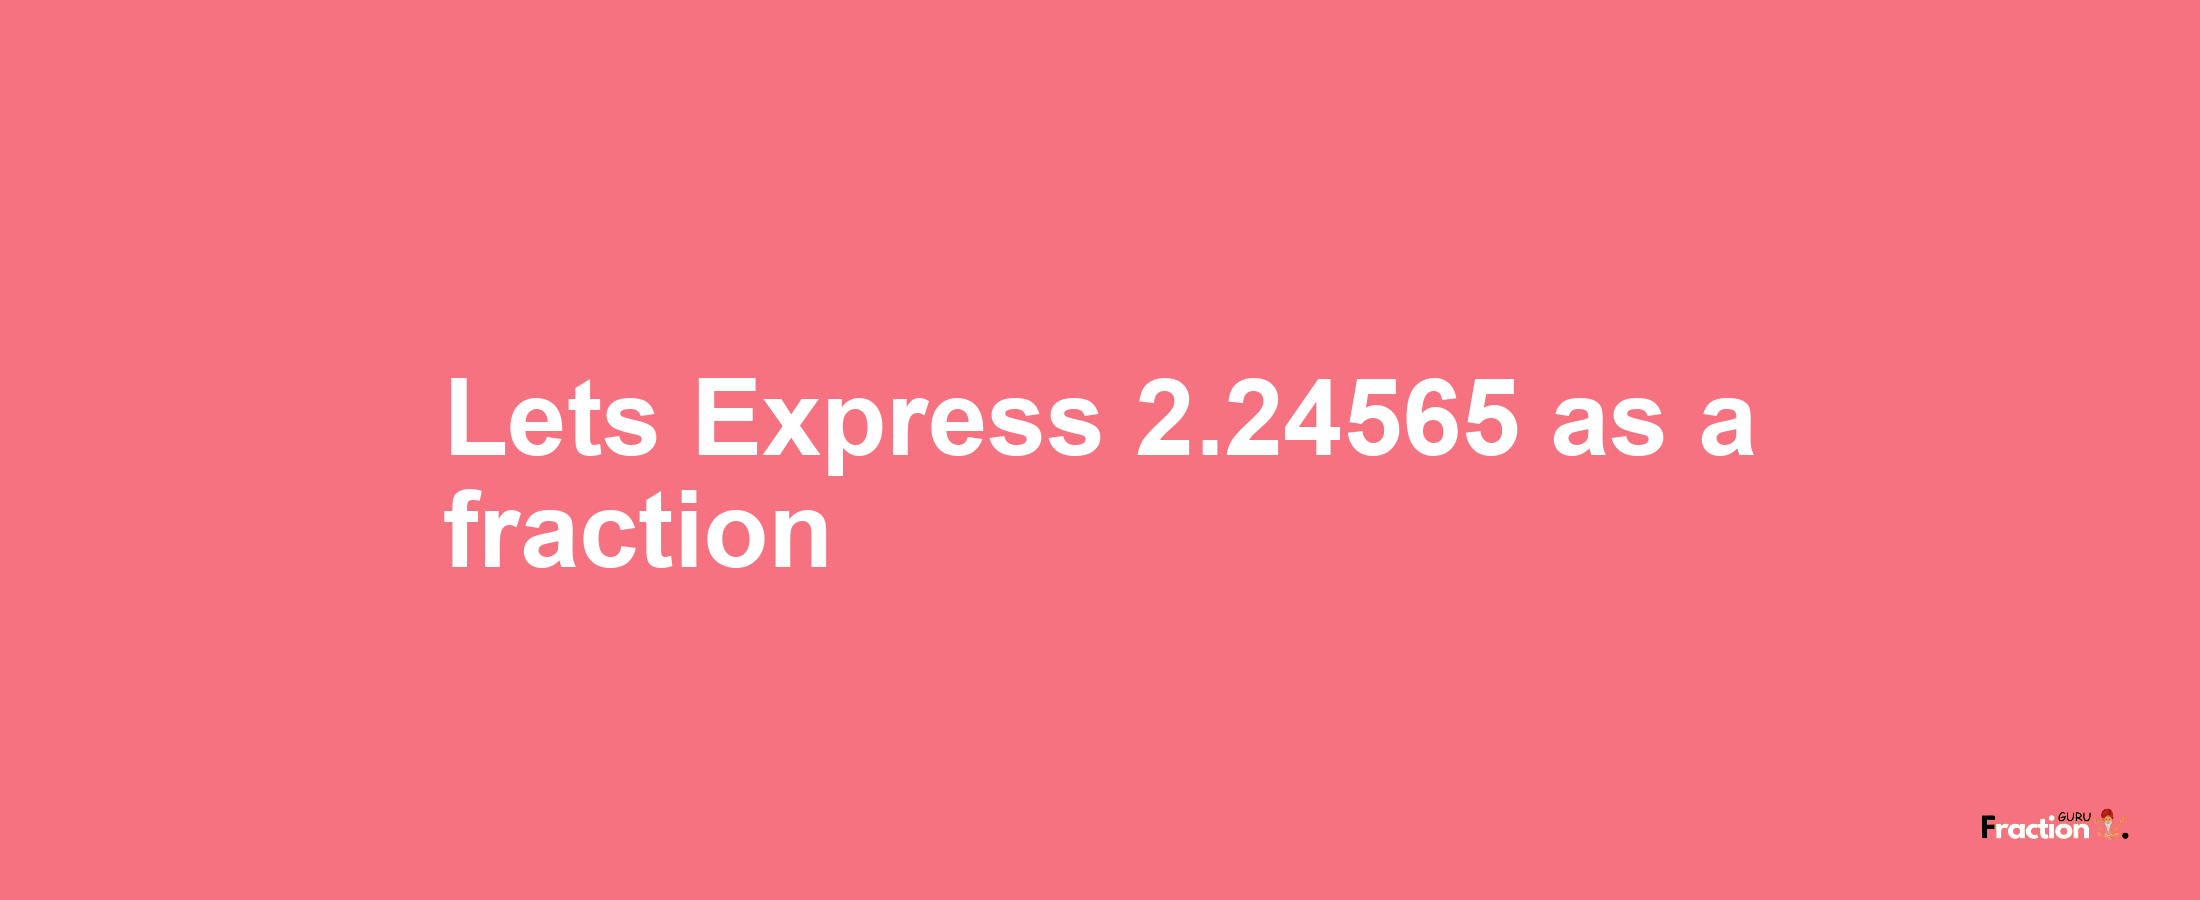 Lets Express 2.24565 as afraction